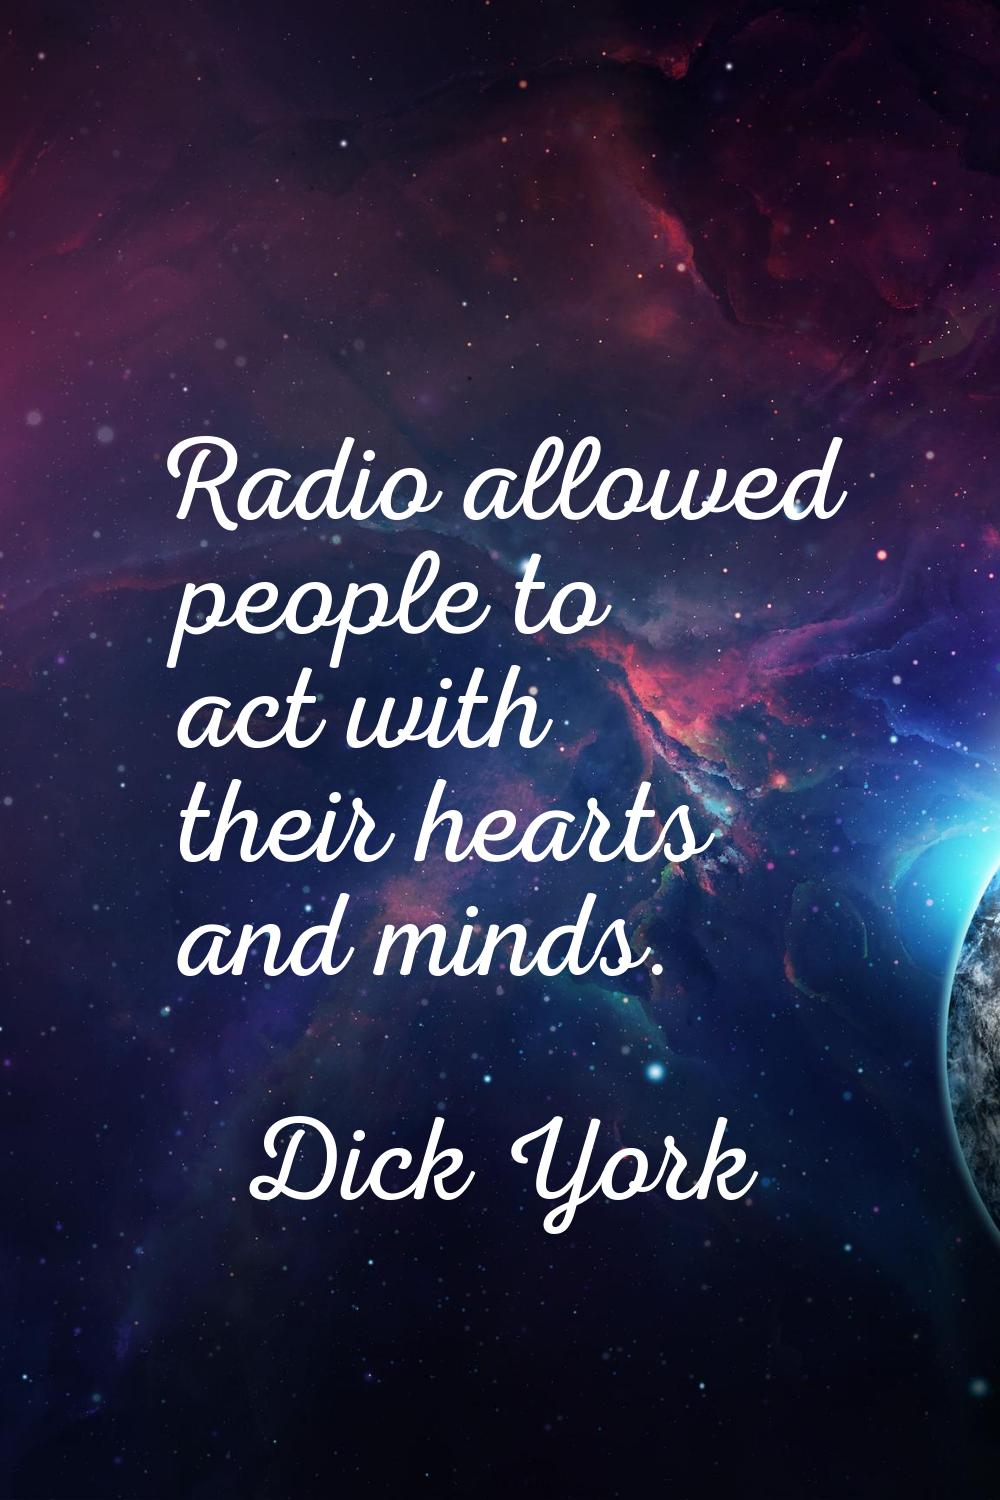 Radio allowed people to act with their hearts and minds.